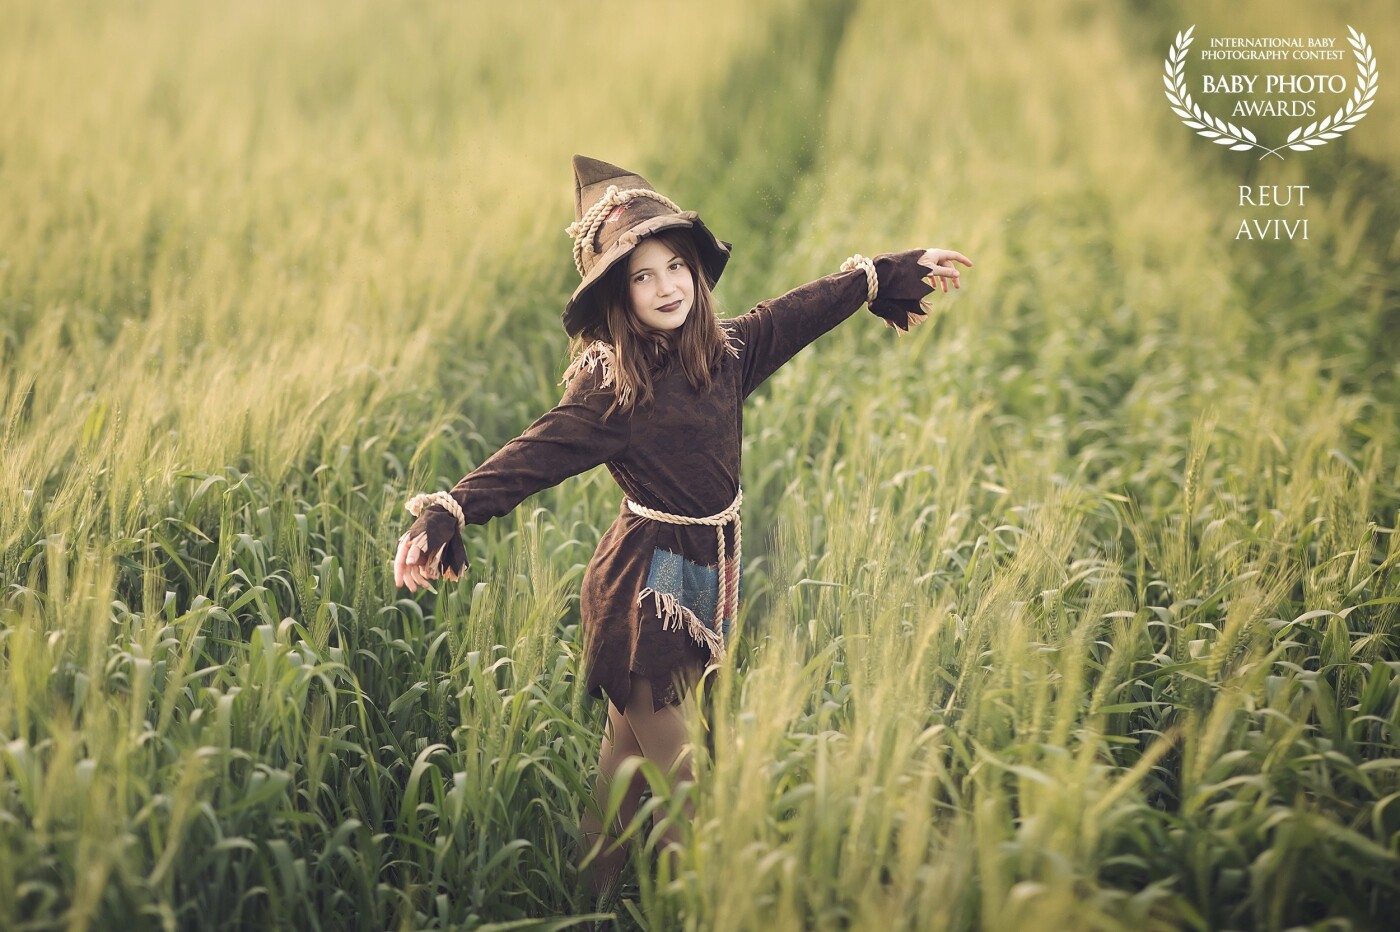 The most beautiful scarecrow I have ever met and I am biased because this is my favorite and regular model :) There is no more beautiful place to emphasize the colors in the picture than a green wheat field in golden time